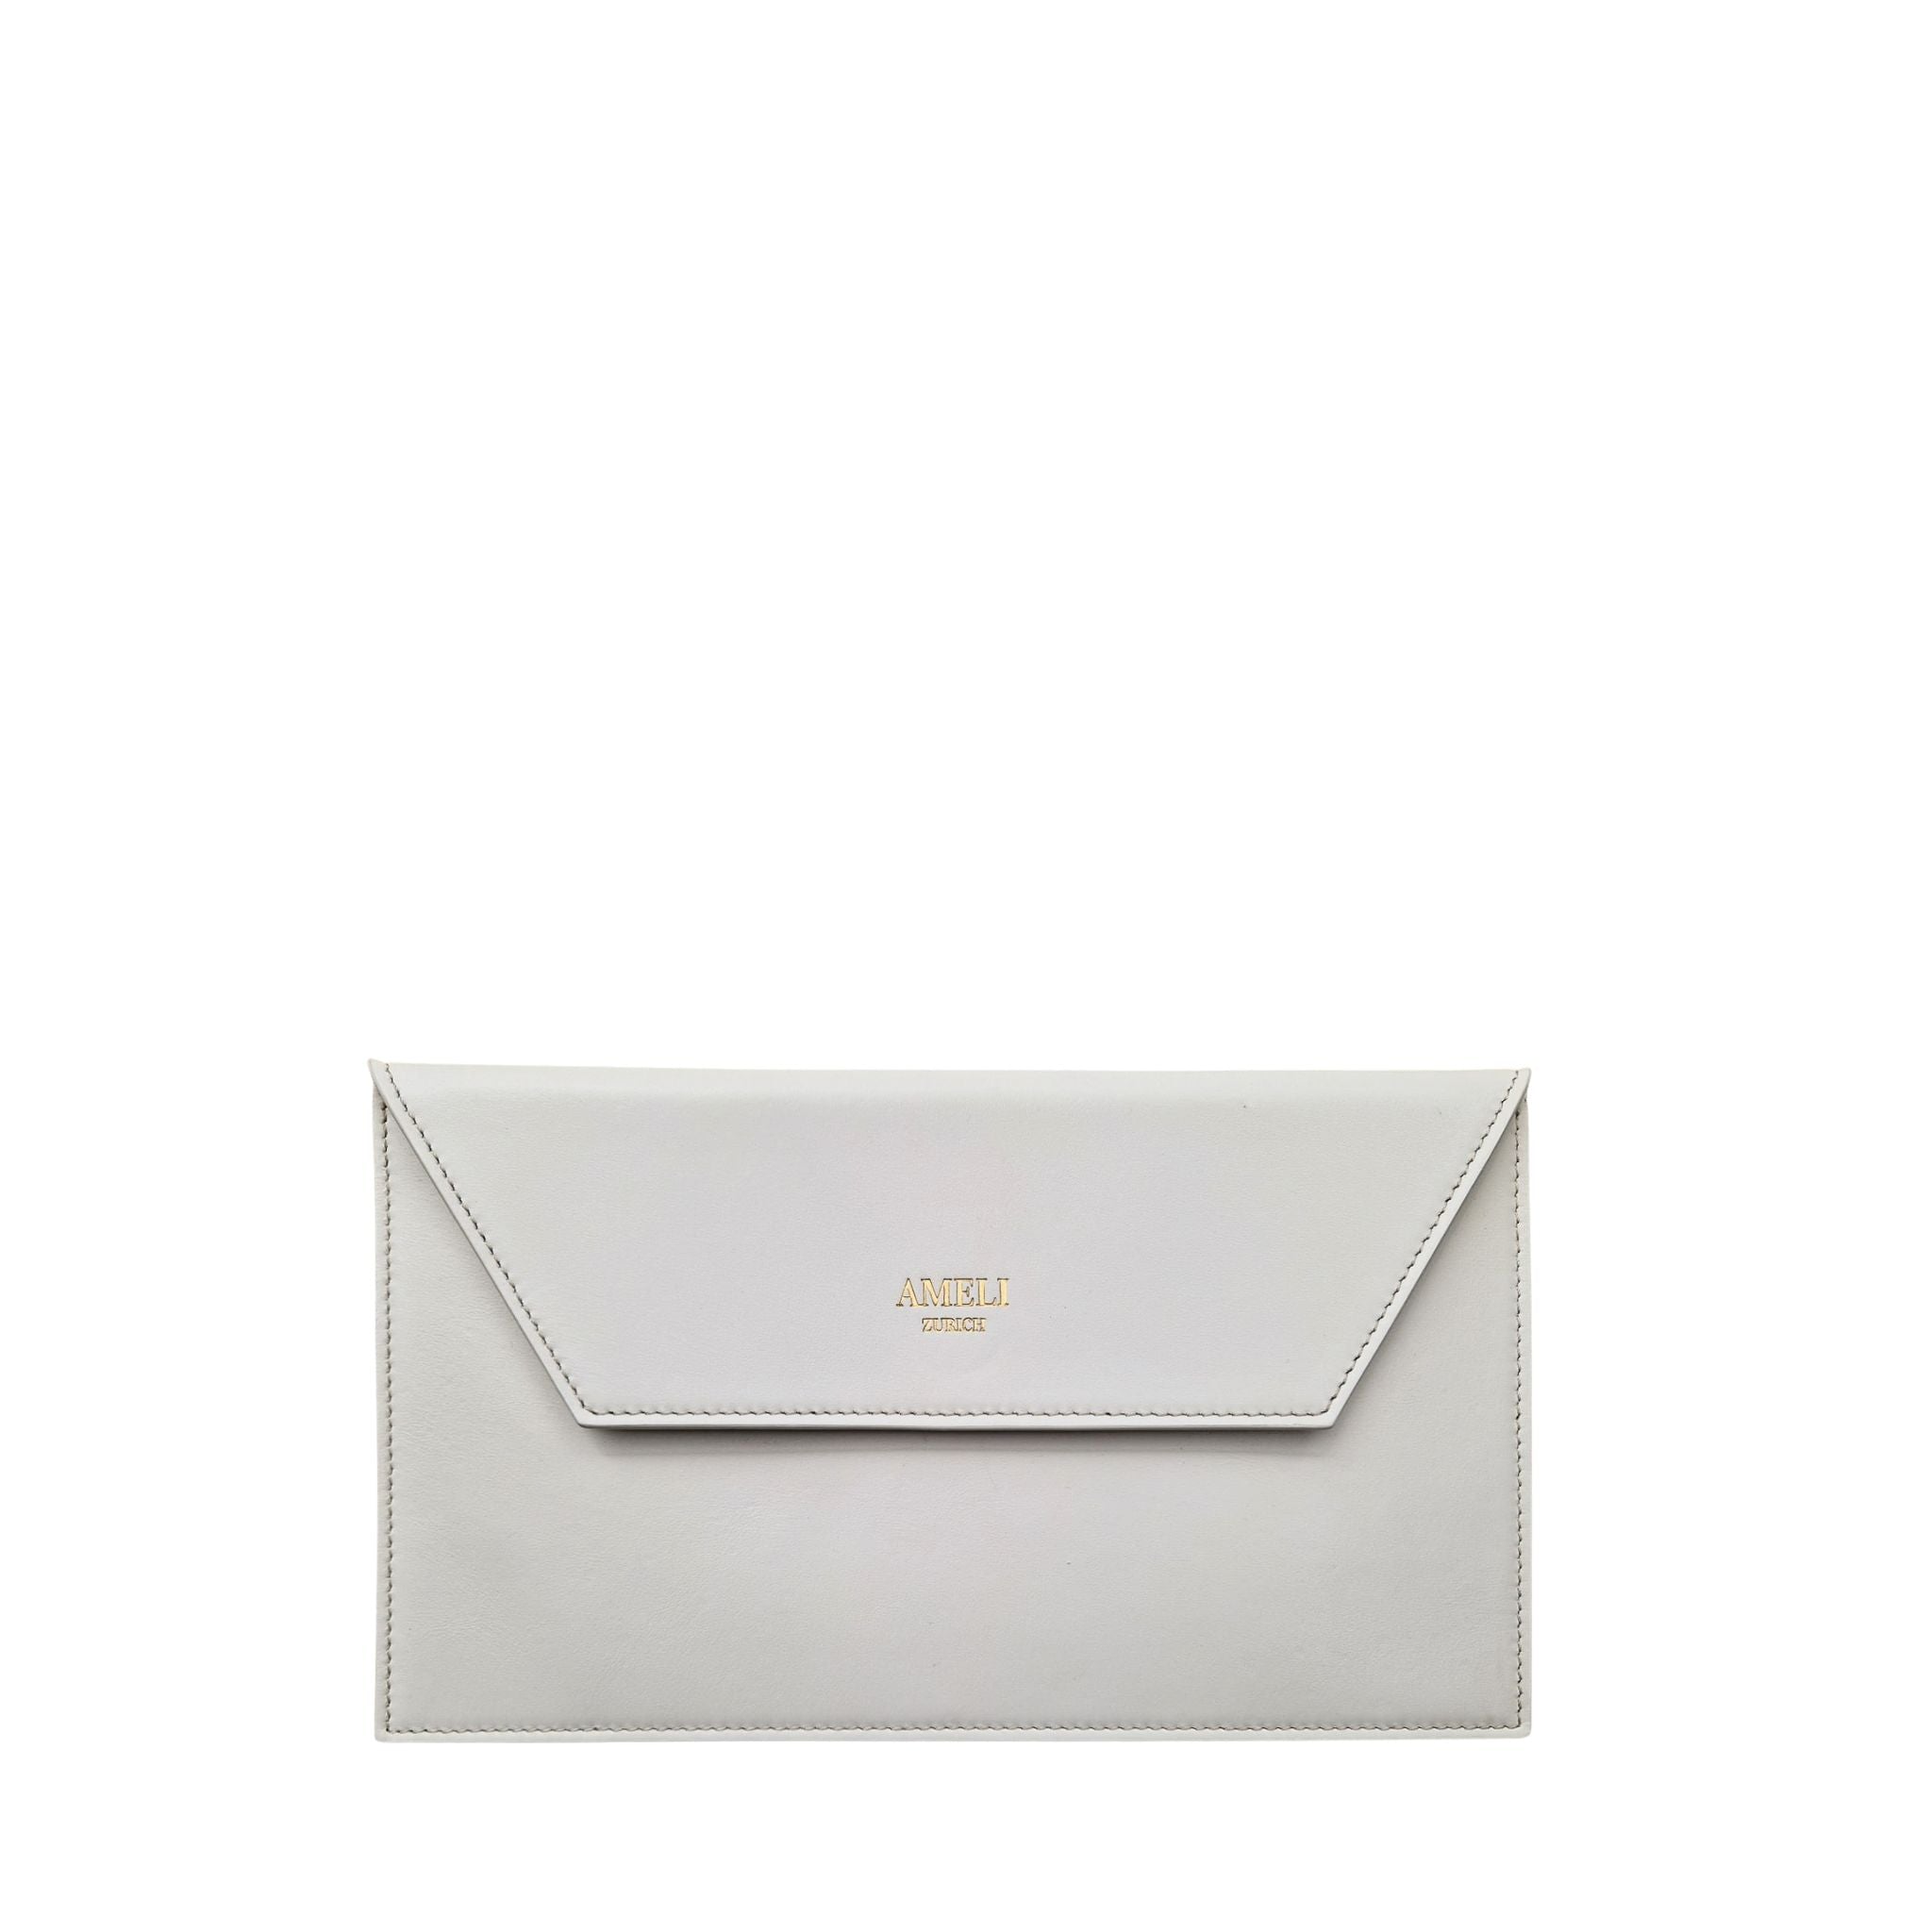 AMELI Zurich | Clutch | White | Smooth Leather | Front